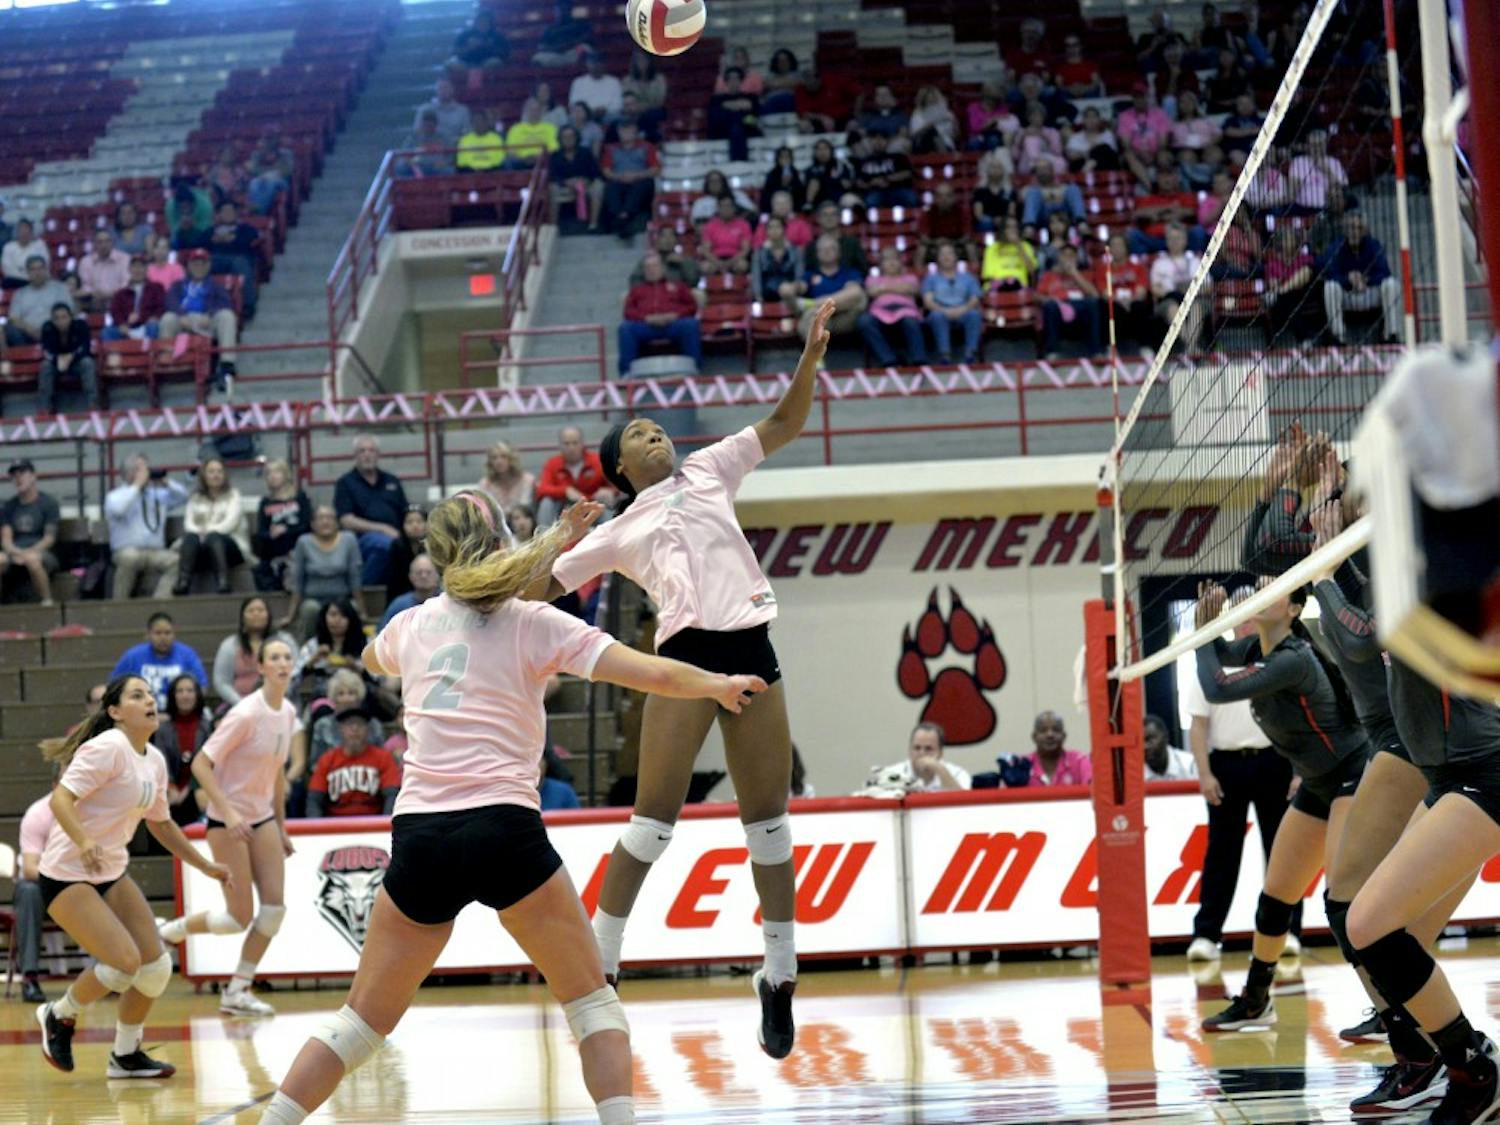 Middle blocker Simone Henderson leaps for a kill against UNLV at Johnson Center on Saturday. The Lobos play the Nevada Wolf Pack in Reno this Thursday.